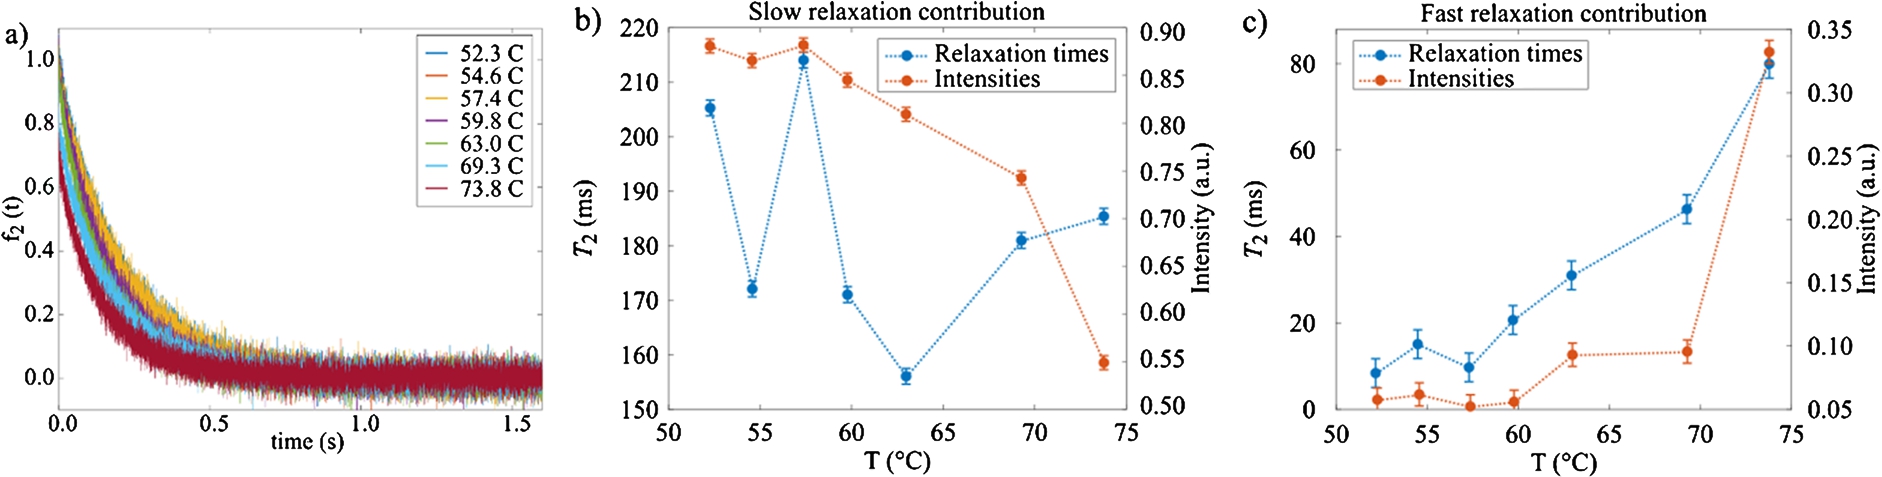 NMR T2 experiments: a) T2 decay curves as a function of temperature, obtained from CPMG experiments. b) and c) Temperature dependence of the relaxation times of the two components of T2, according to the data fitting with a bi-exponential model Eq. (6). The integrated intensities of these two relaxation time contributions are also shown.